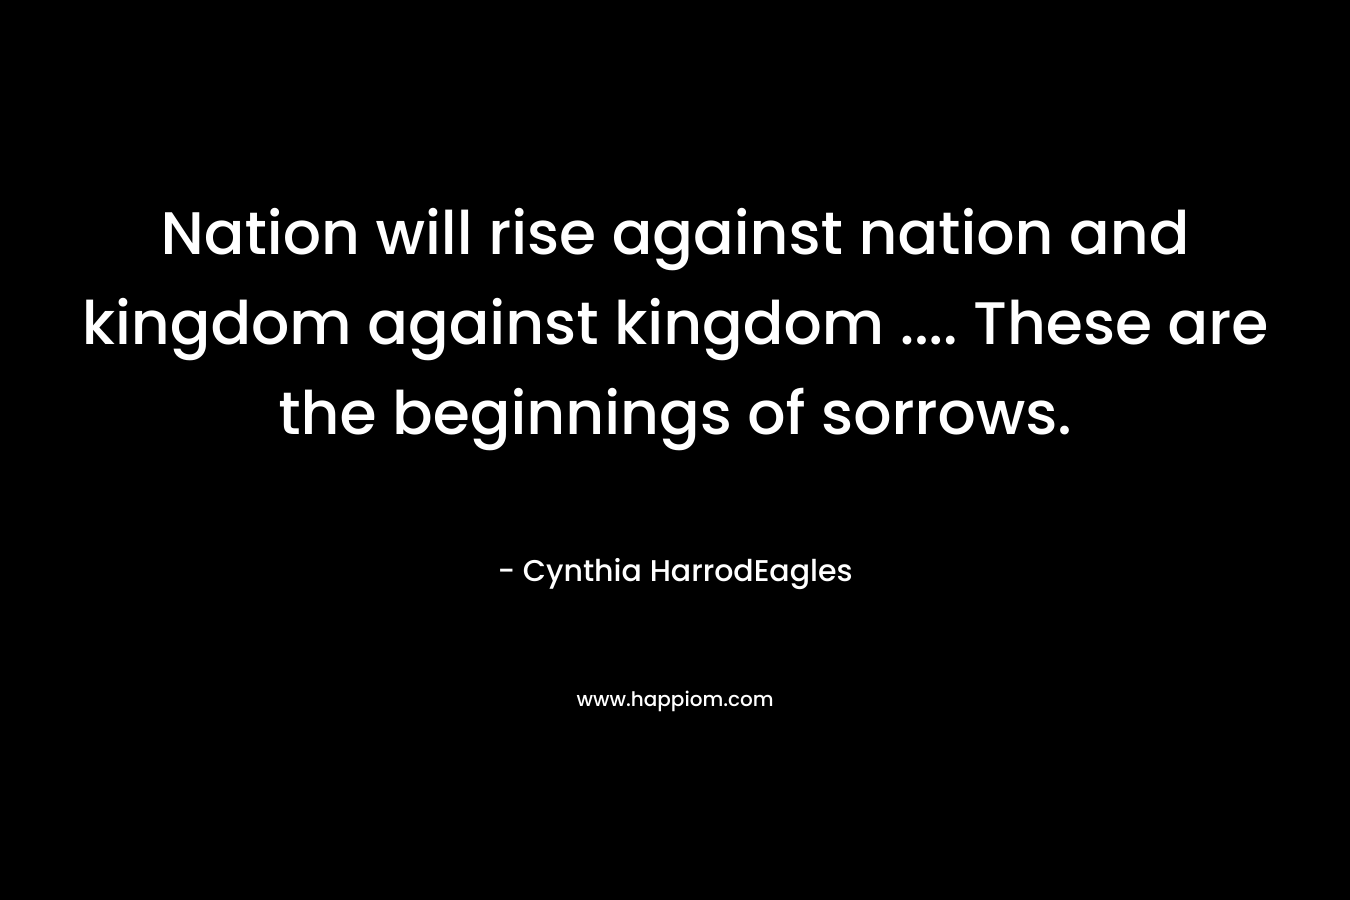 Nation will rise against nation and kingdom against kingdom .... These are the beginnings of sorrows.